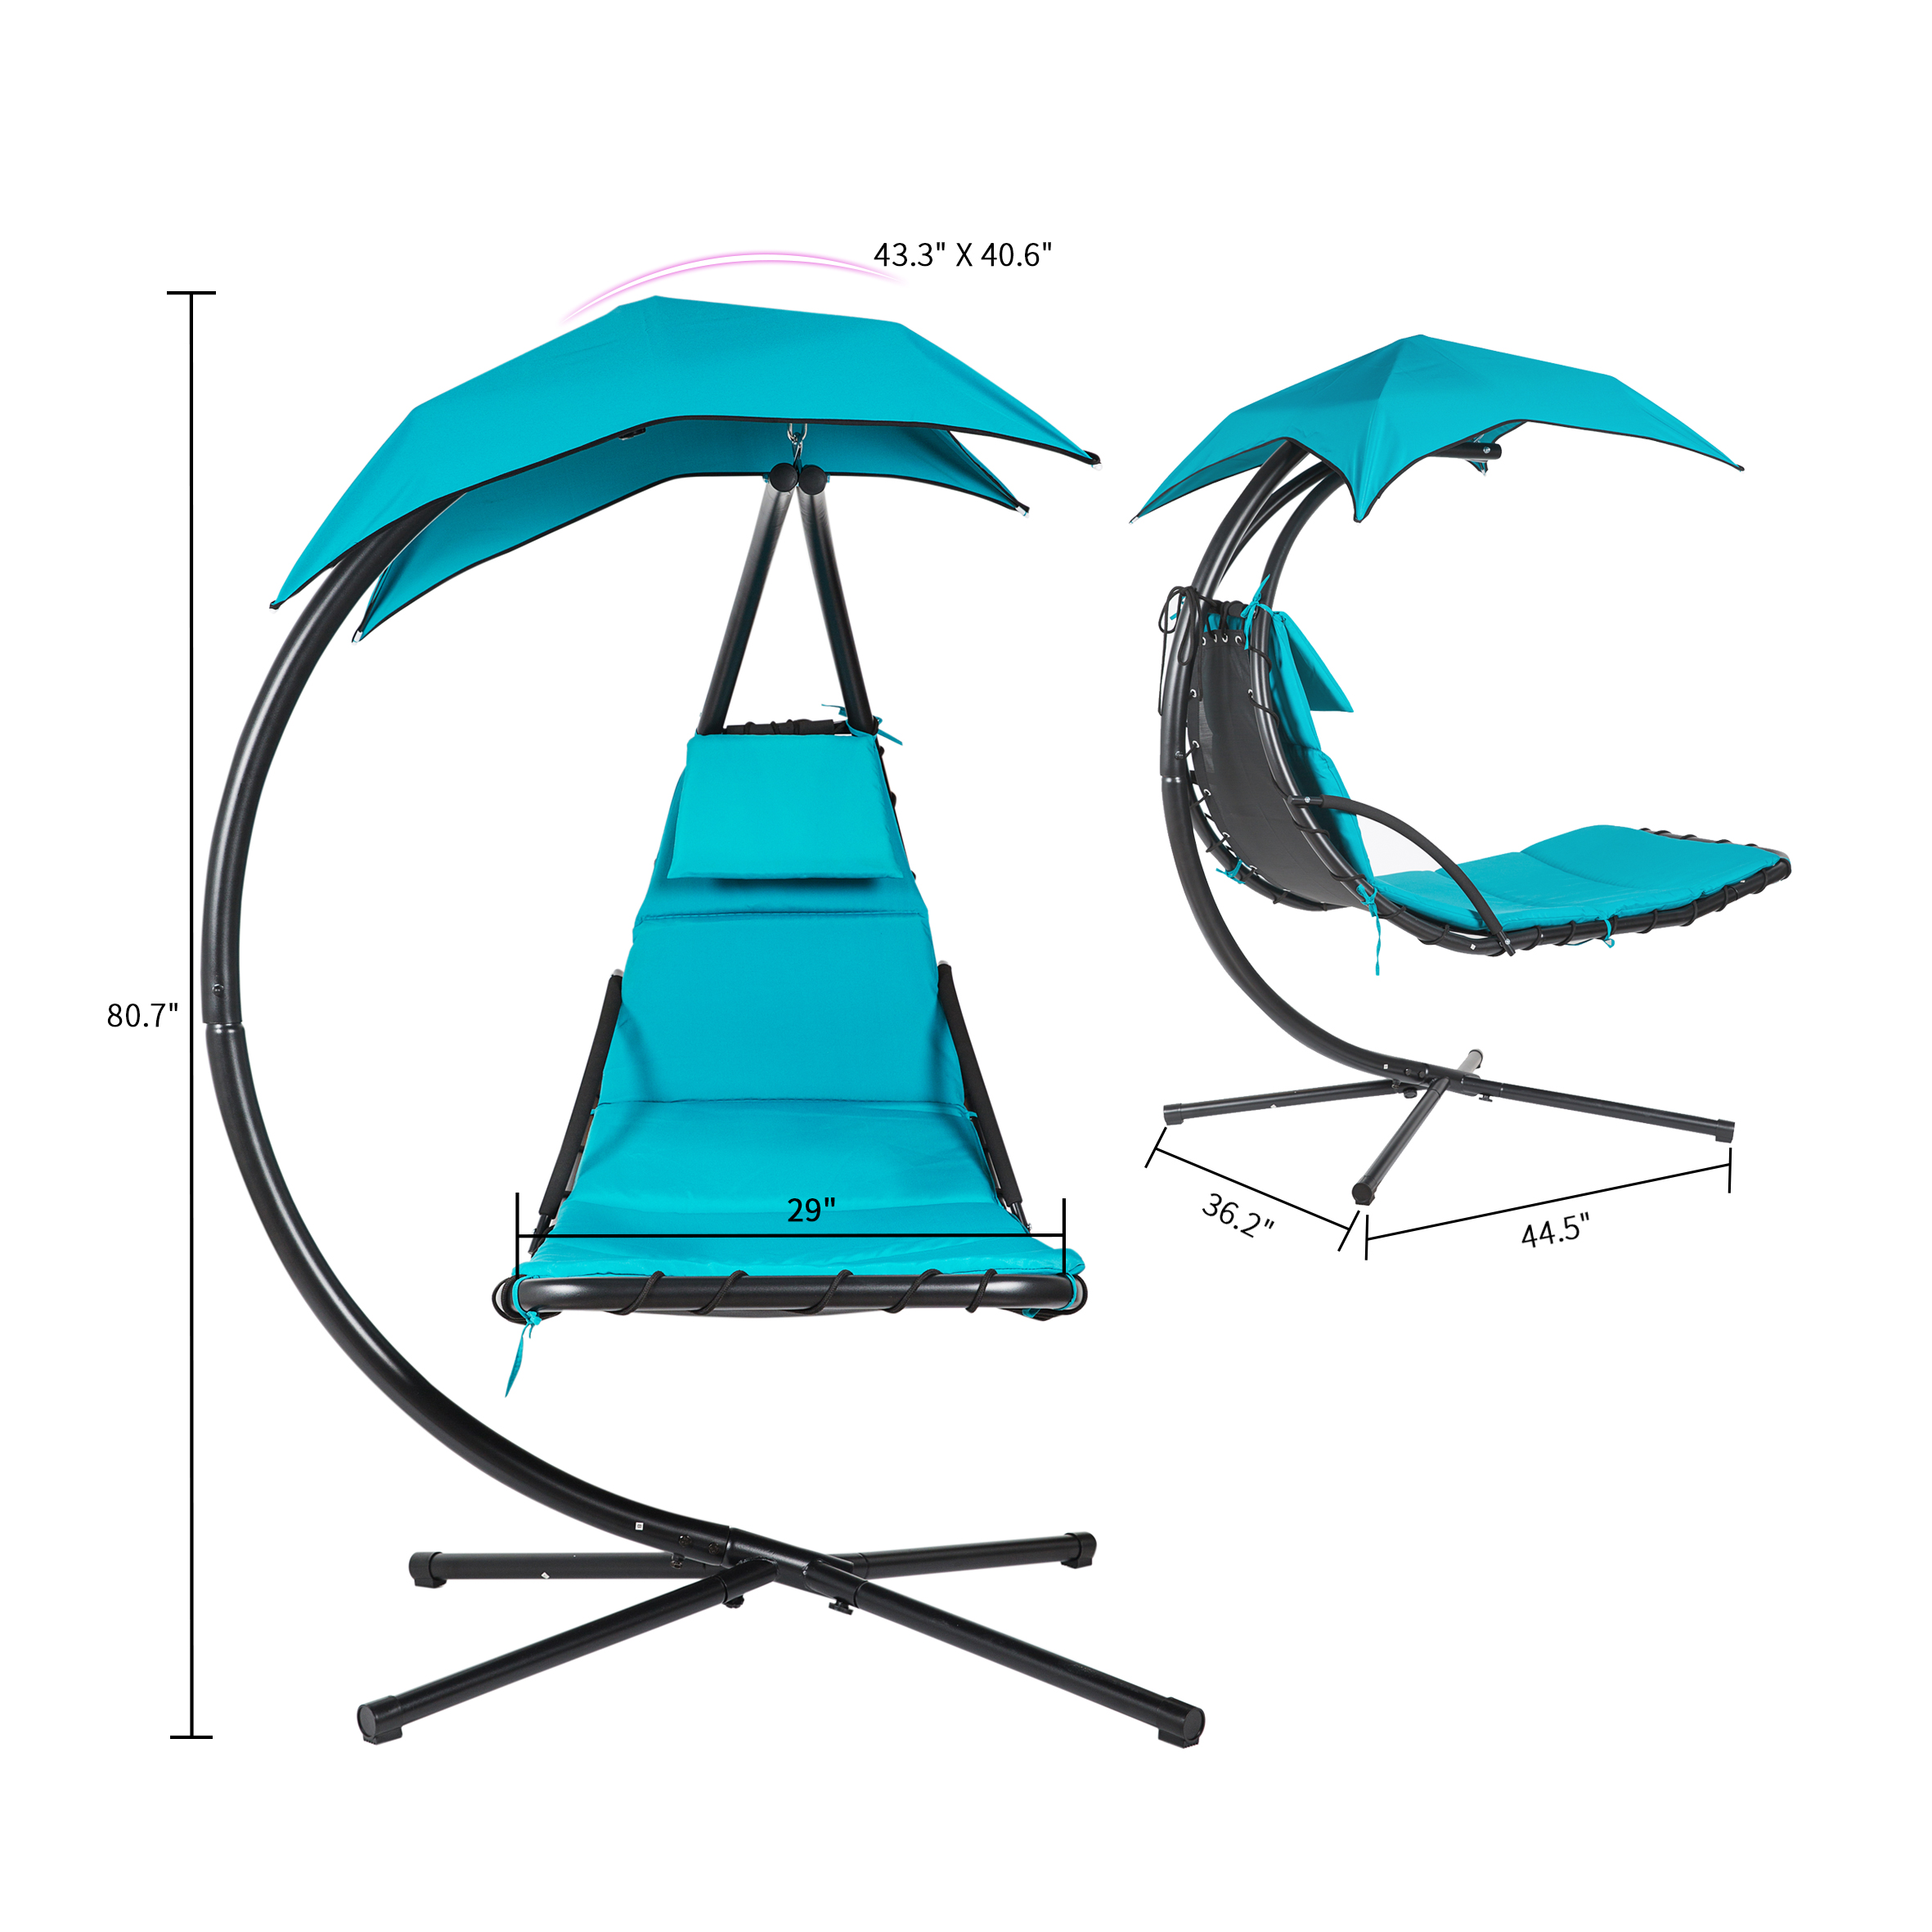 Finefind Hanging Chaise Lounge Chair Floating Swing Hammock Chair Steel Patio, Blue - image 5 of 7